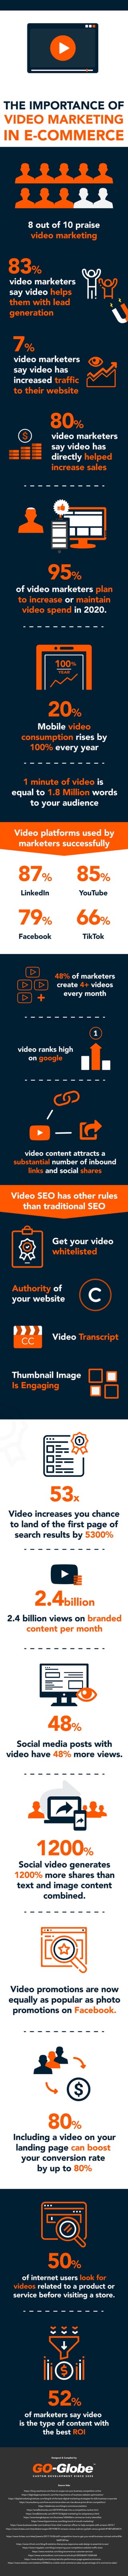 The importance of video marketing in eCommerce [Infographic]